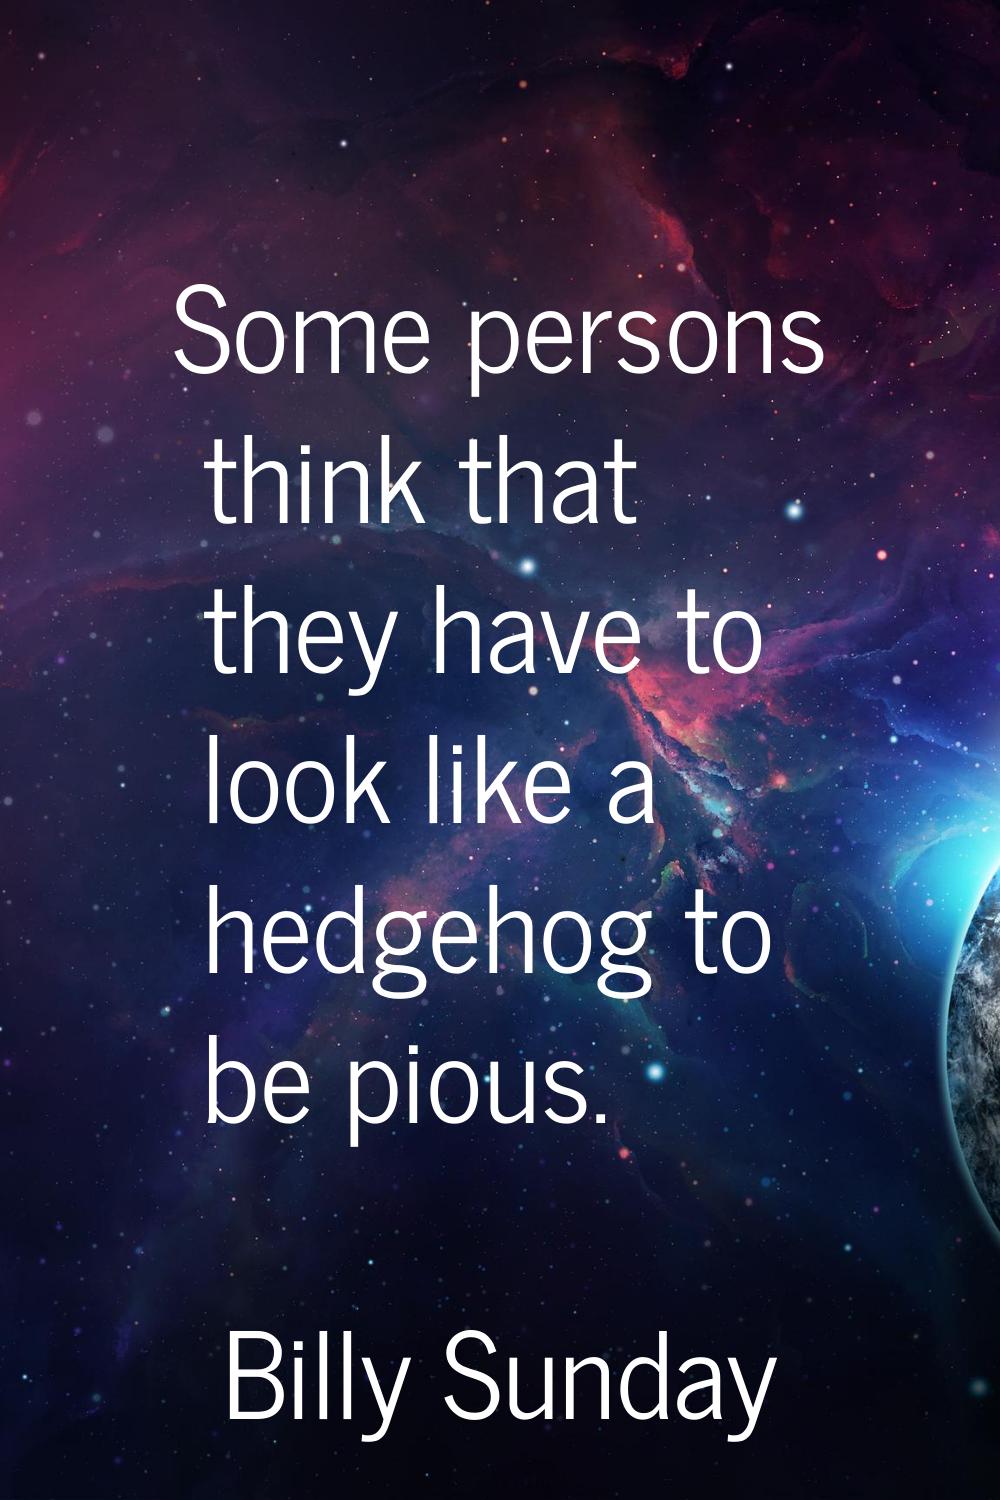 Some persons think that they have to look like a hedgehog to be pious.